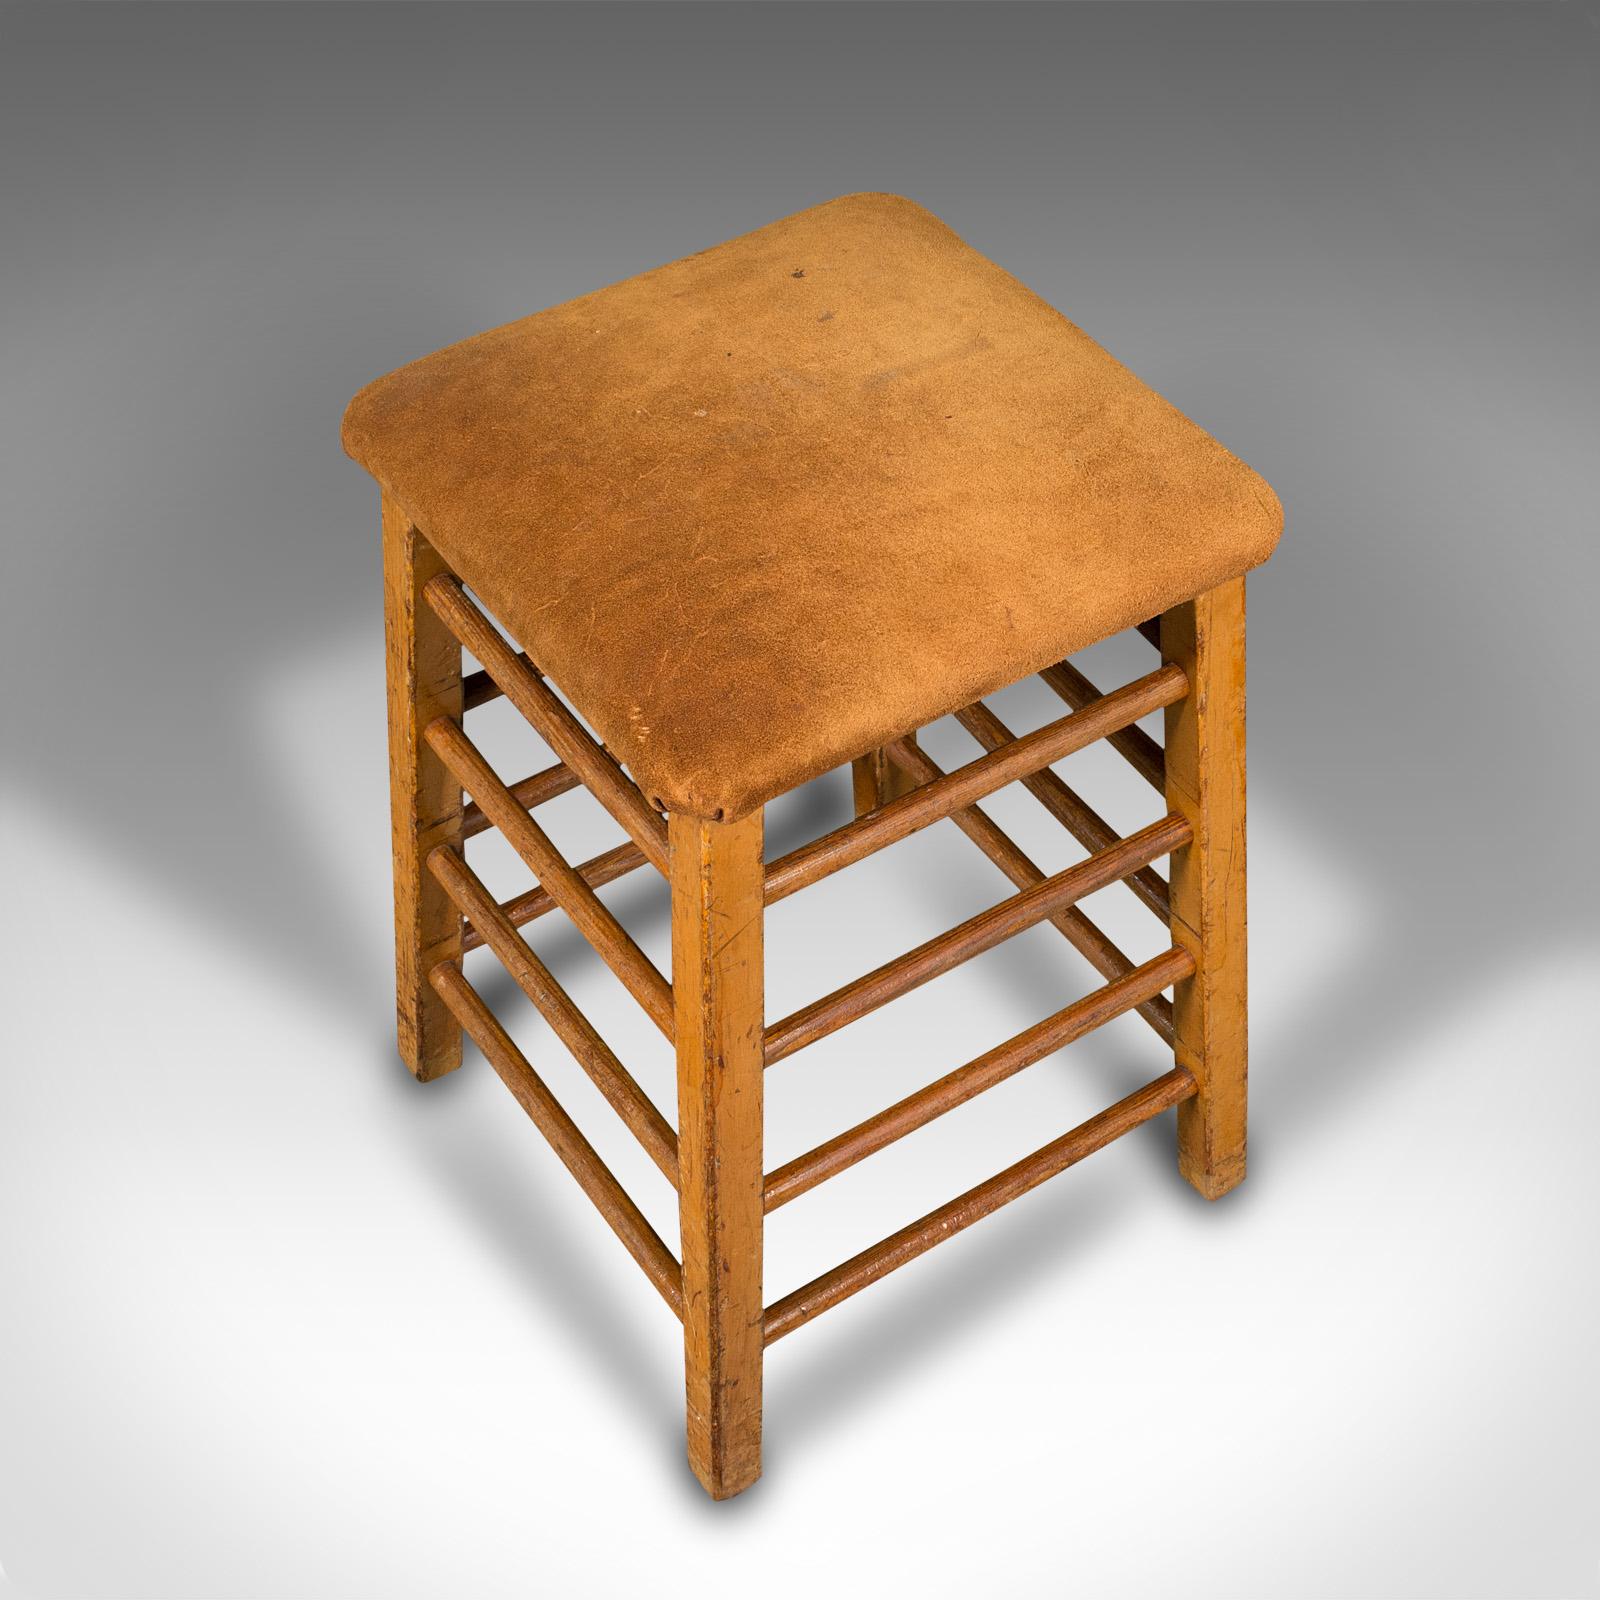 Large Vintage Artist's Stool, English, Pitch Pine, Suede, Gym, Lab Seat, C.1960 For Sale 1